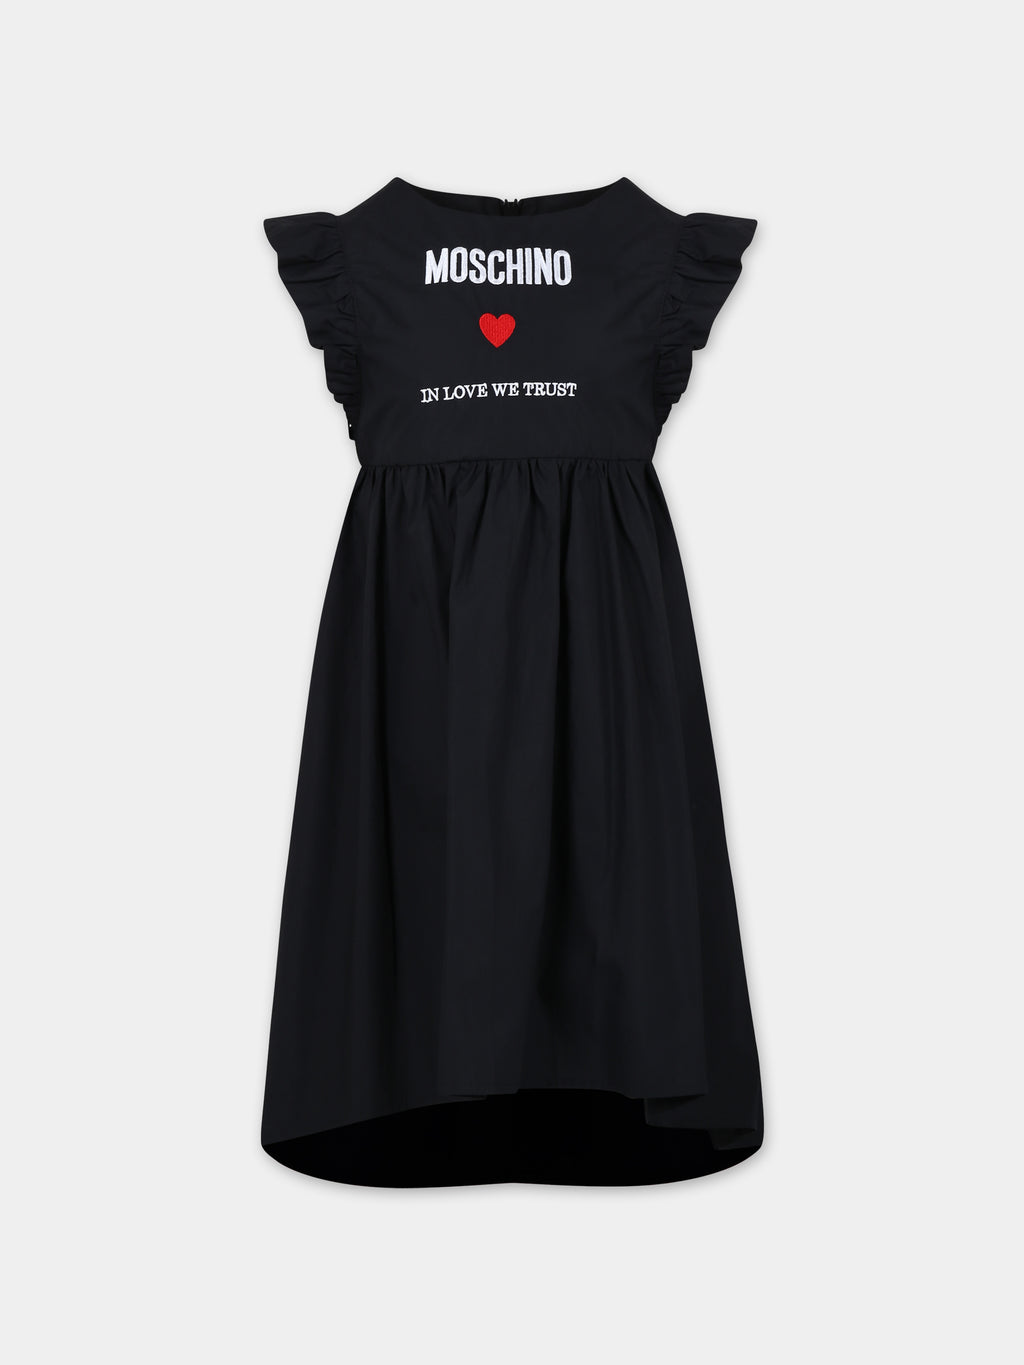 Black dress for girl with logo and heart